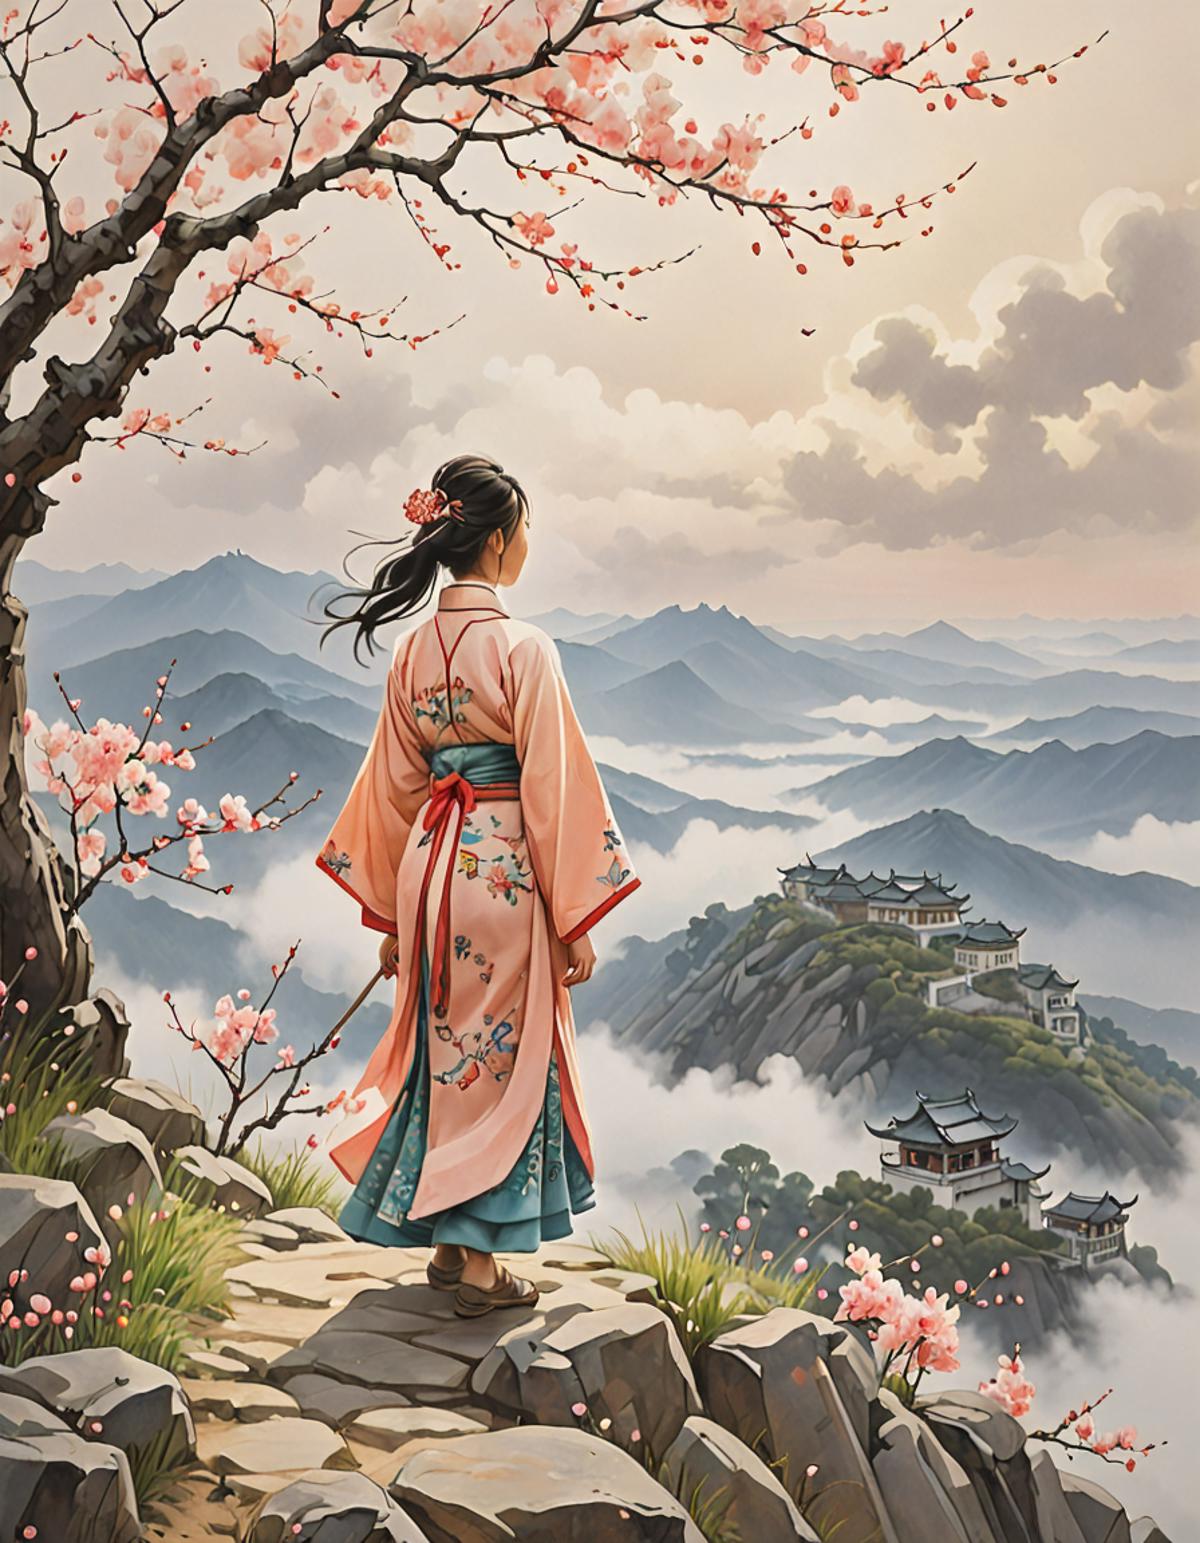 A girl in a kimono standing on a rocky hill with cherry blossoms in the background.